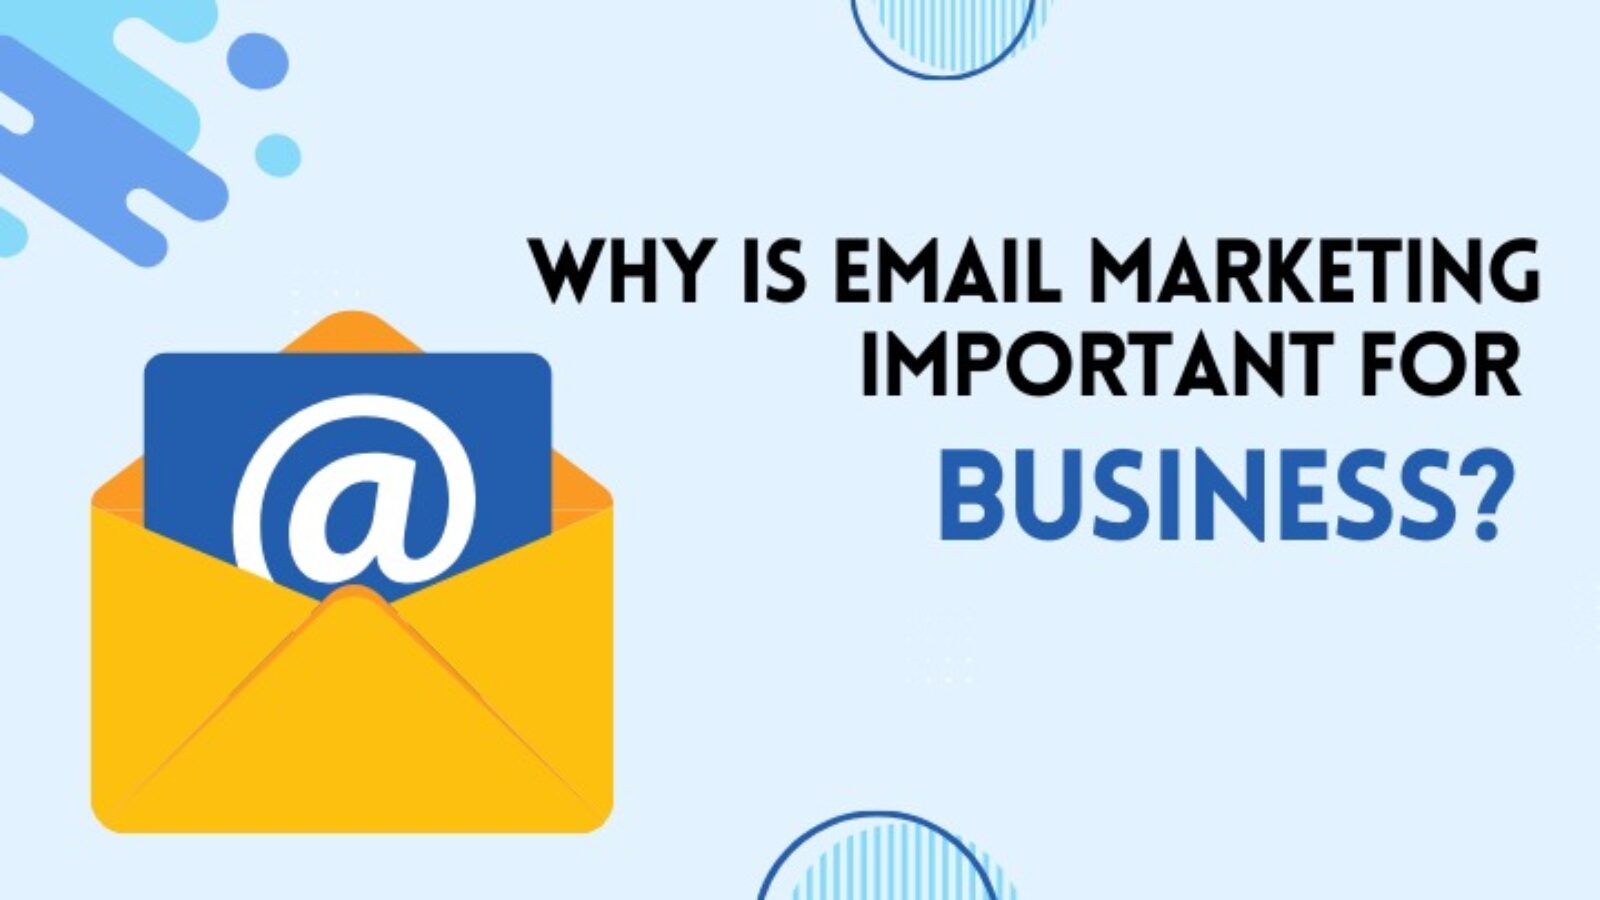 Why email marketing is important for business